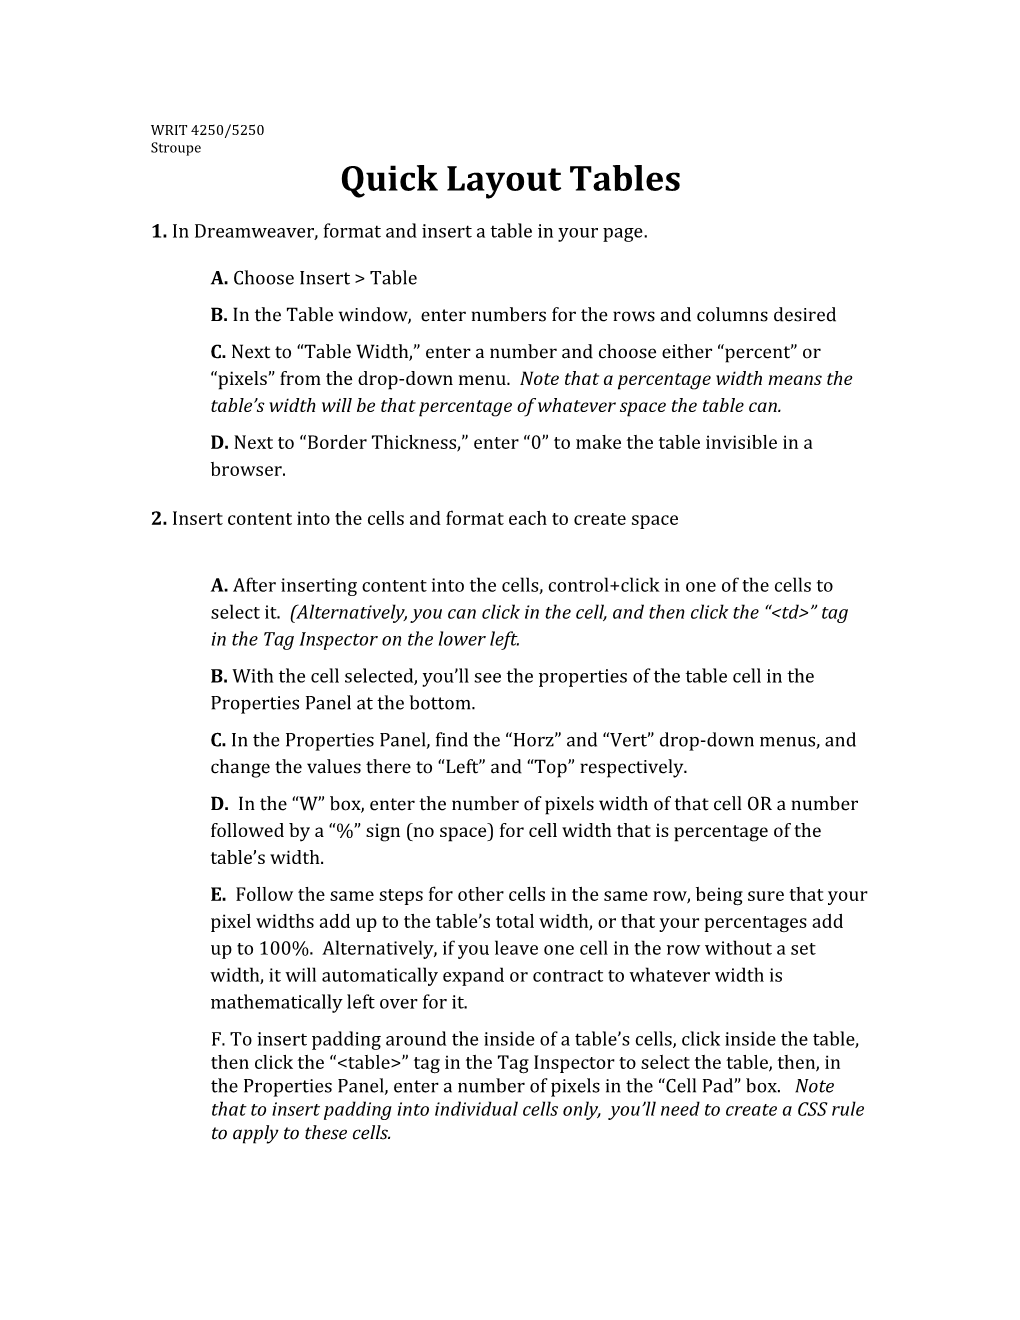 Quick Layout Tables